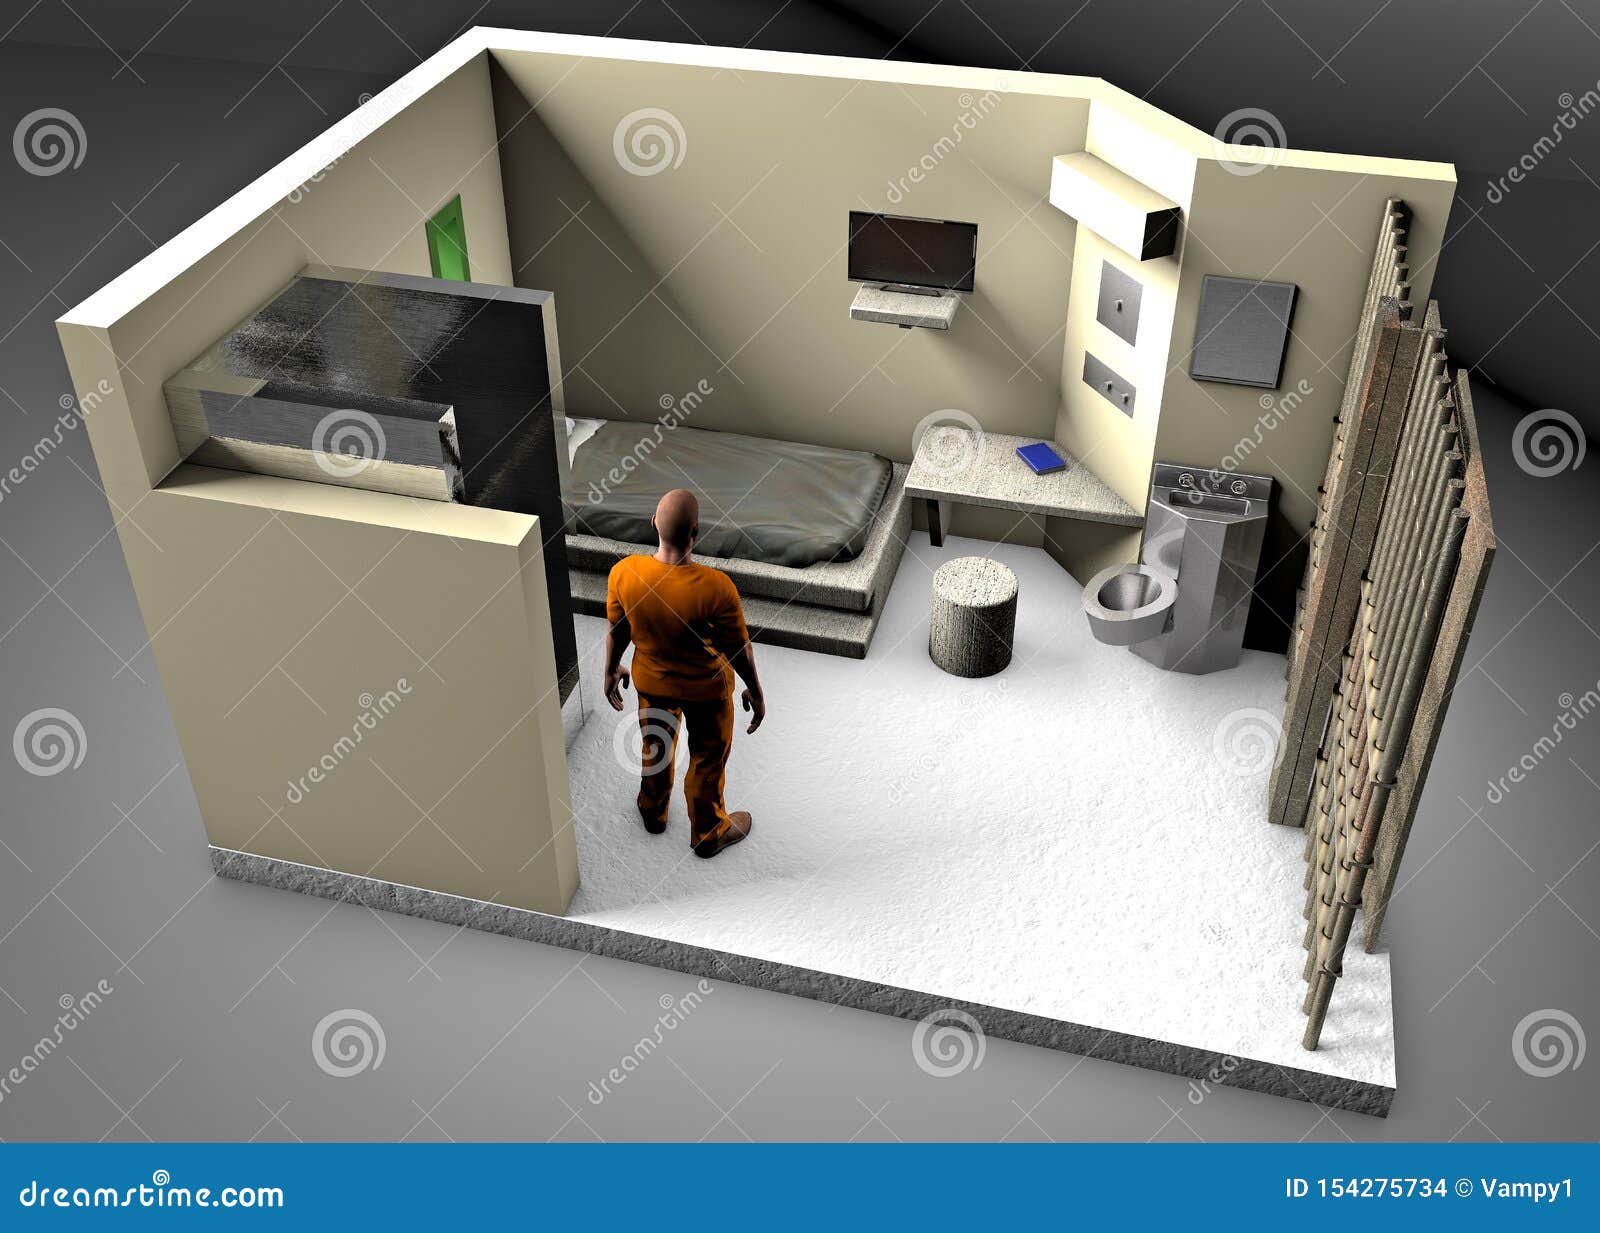 3d Reconstruction Of A Prison Cell Adx Florence Supermax Colorado Penitentiary Us Maximum Security Penitentiary Center Stock Illustration Illustration Of Cosmos Orbit